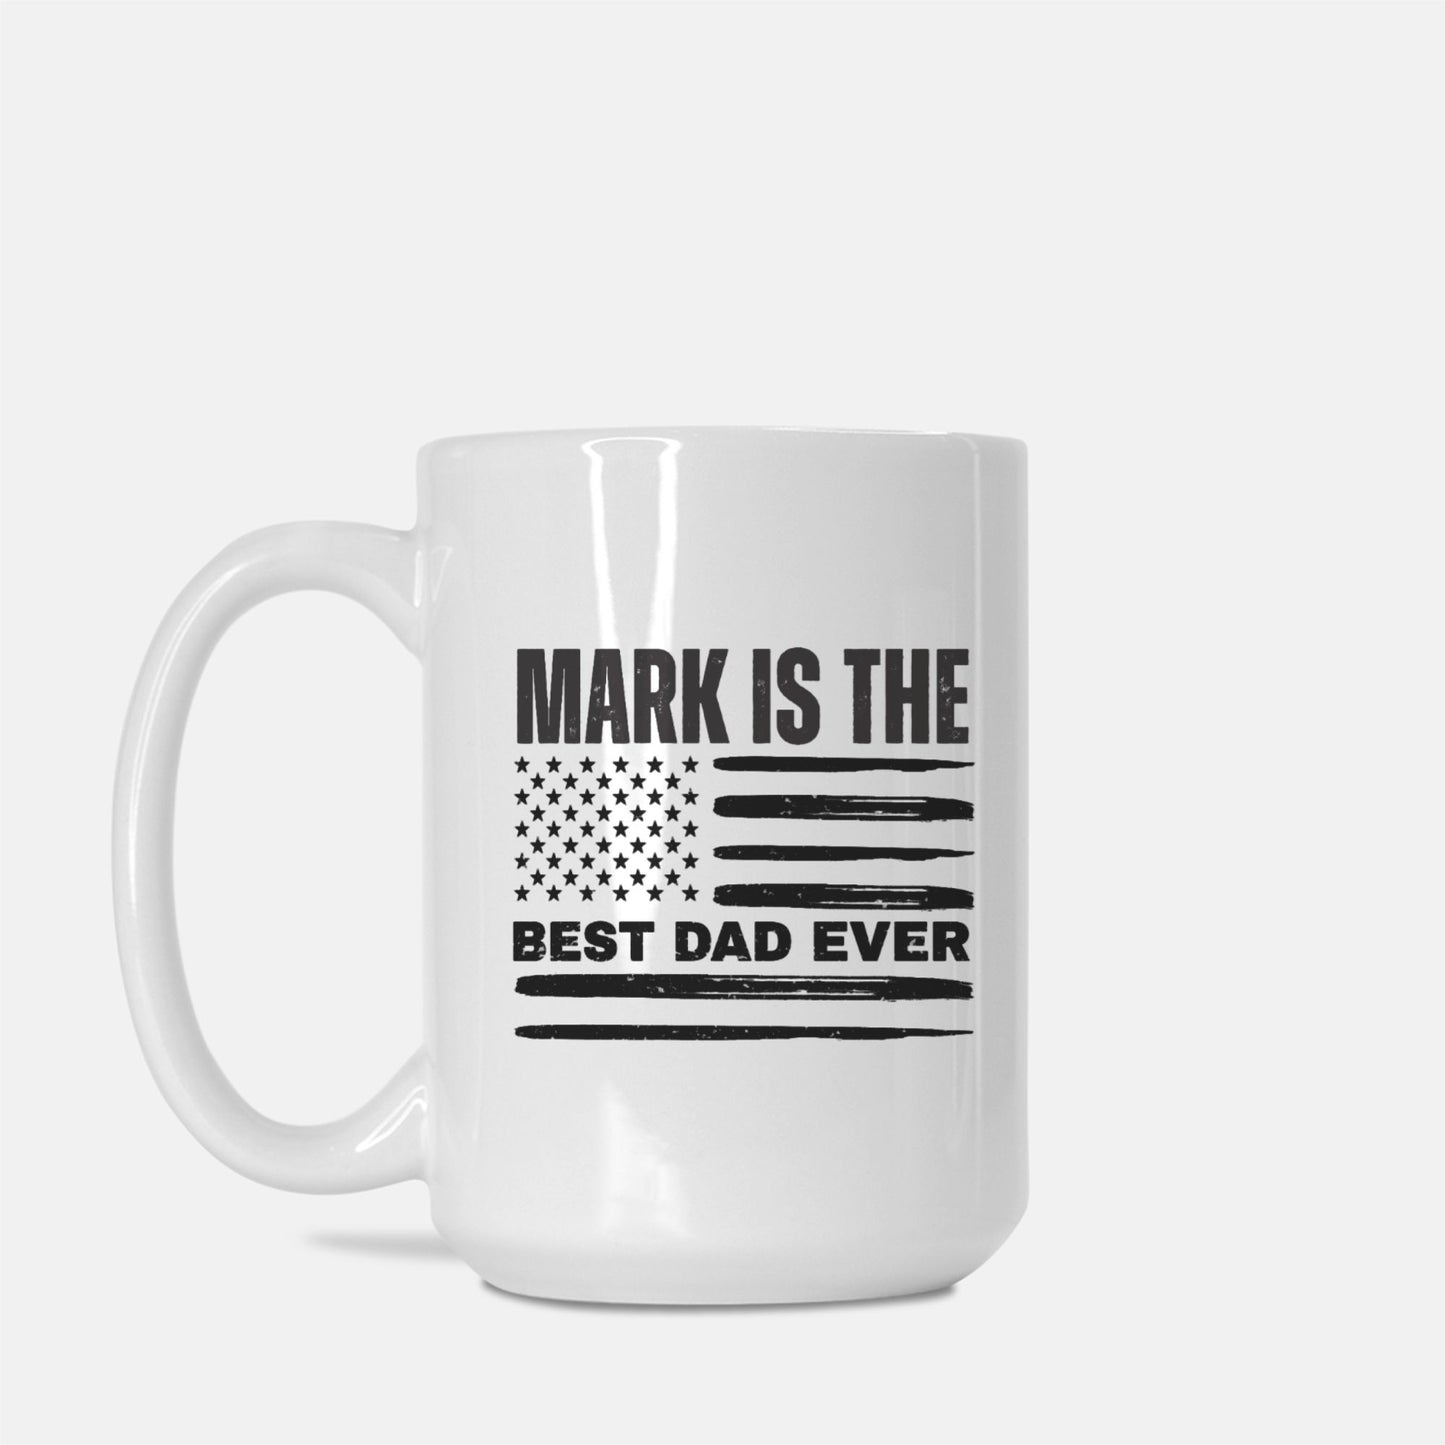 Is The Best Dad Ever Personalized Mug Deluxe